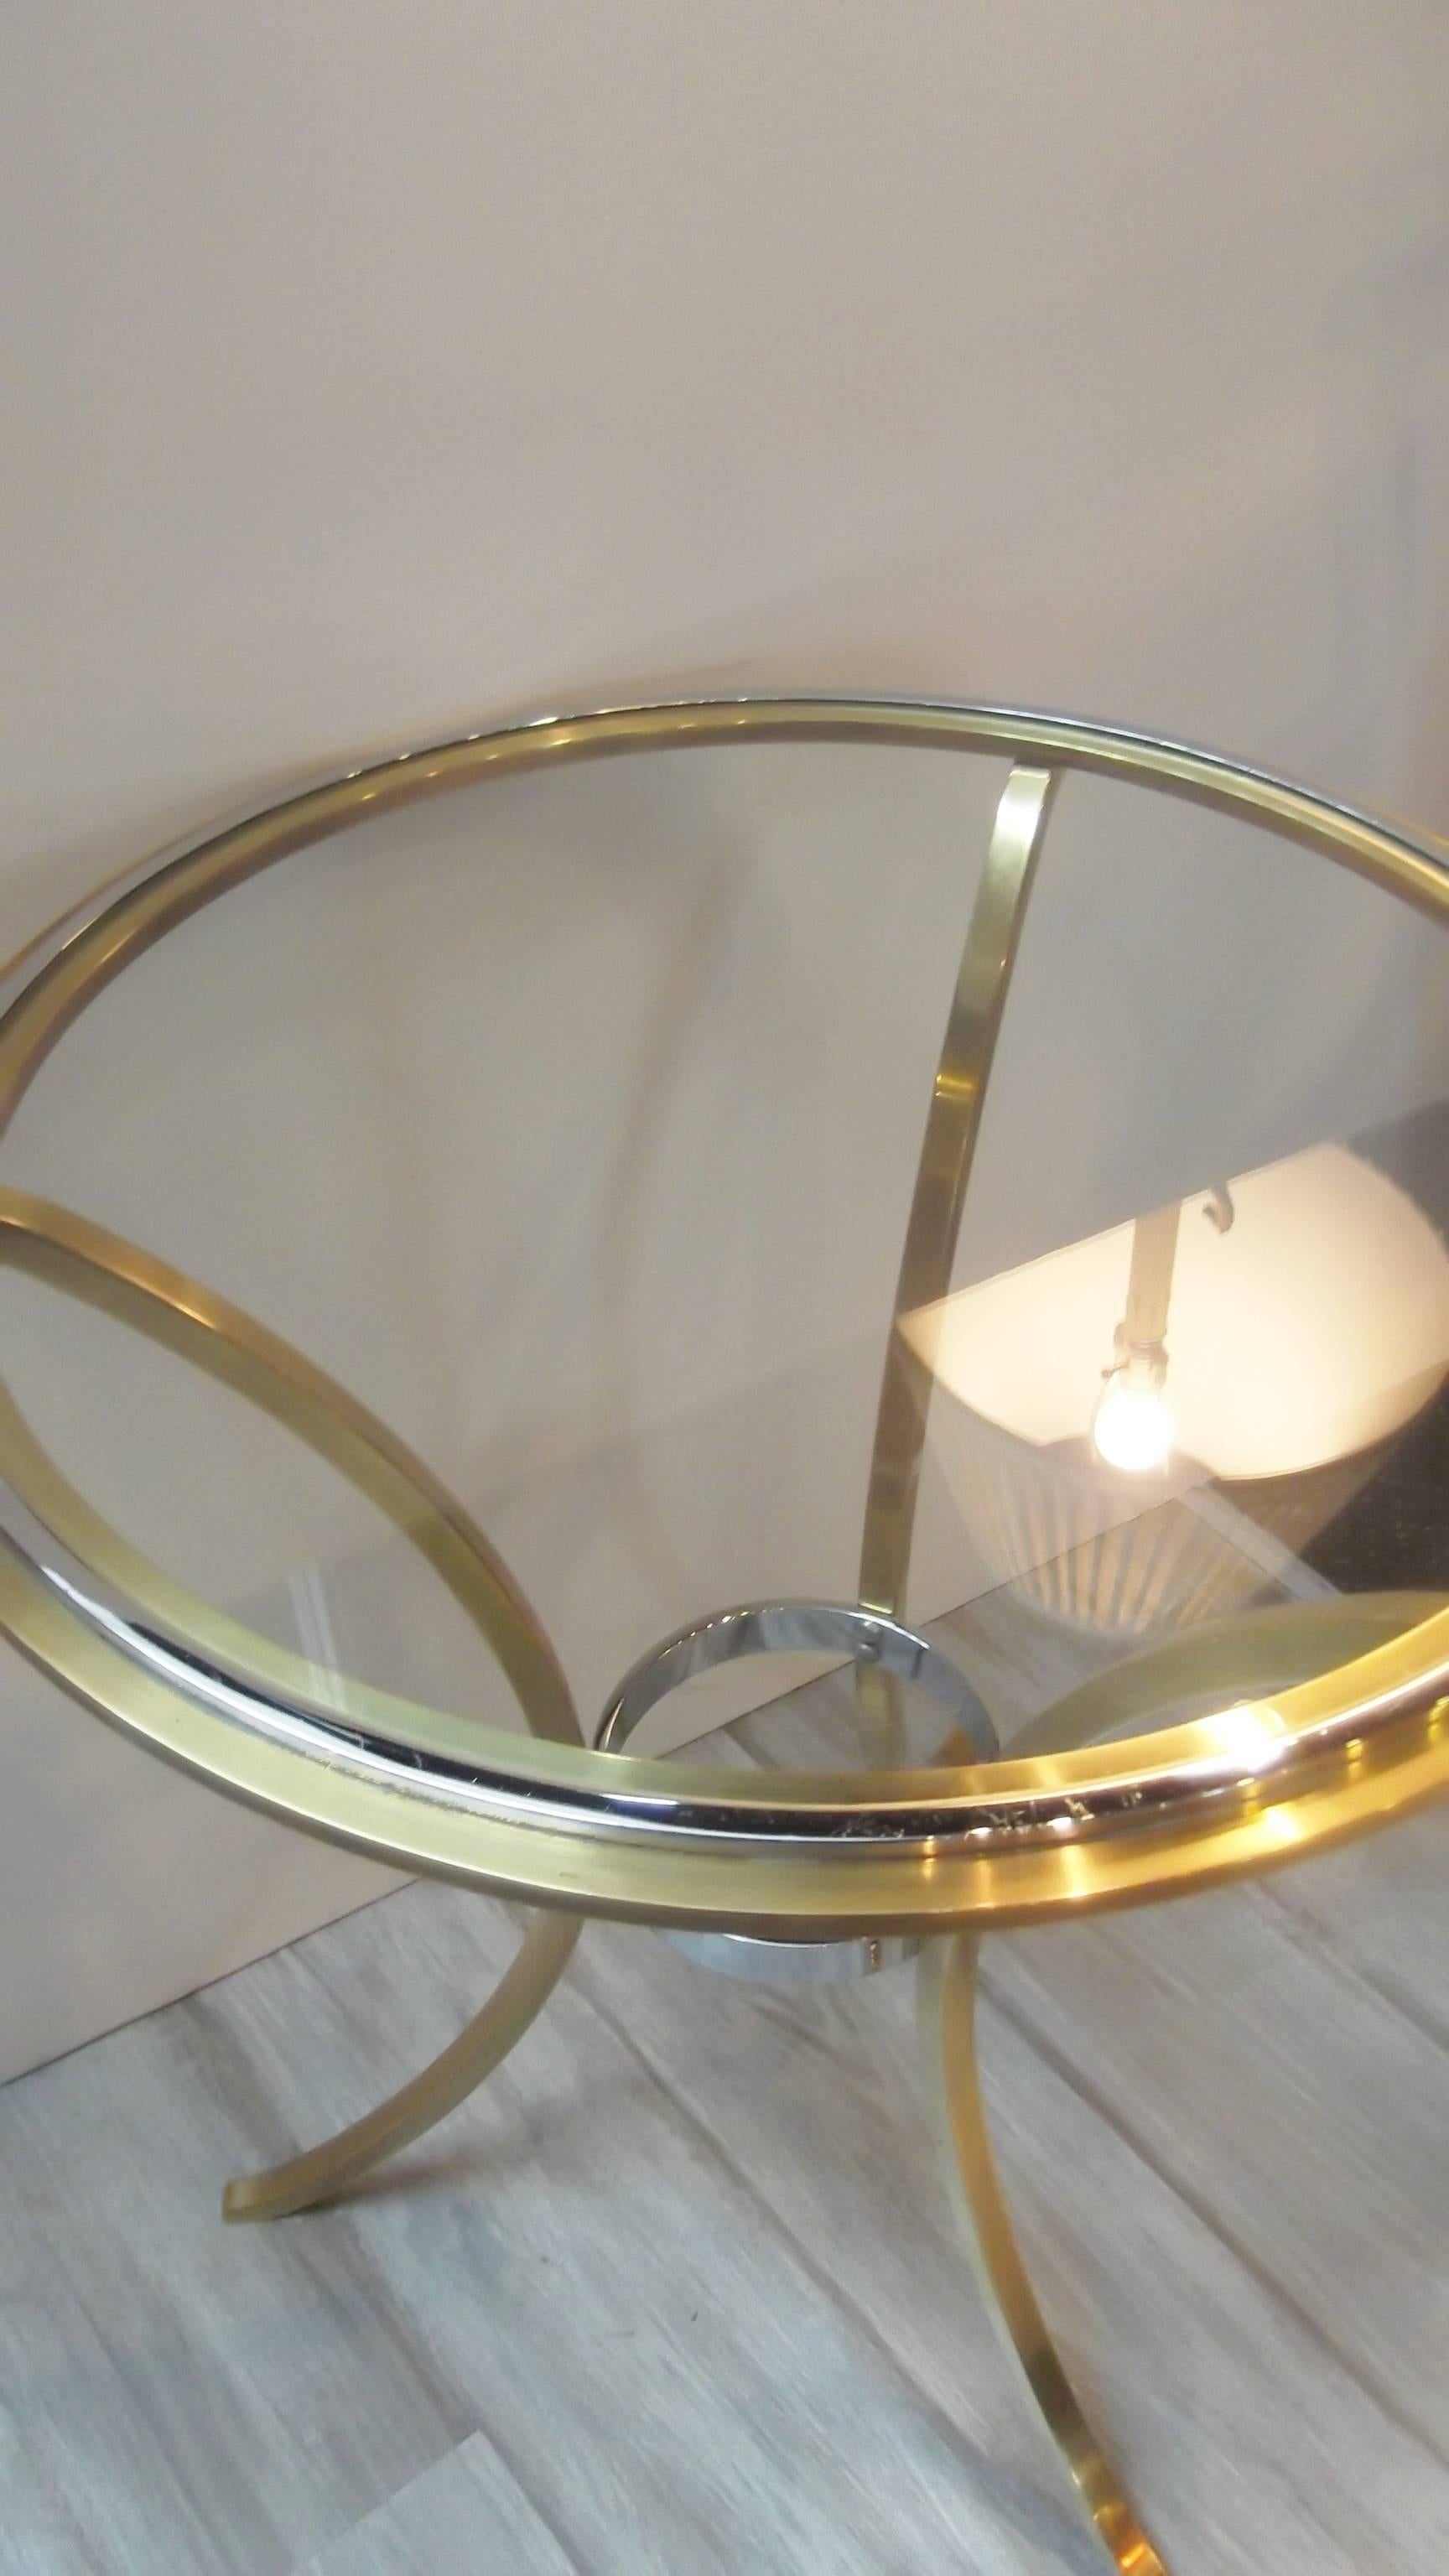 Elegant Maison Jansen chrome and brass accent table. The glass top is neatly fitted into the round cast brass base with a contrasting chrome detail. The table is a nice medium size and perfect for a city apartment. This is a cast body with good